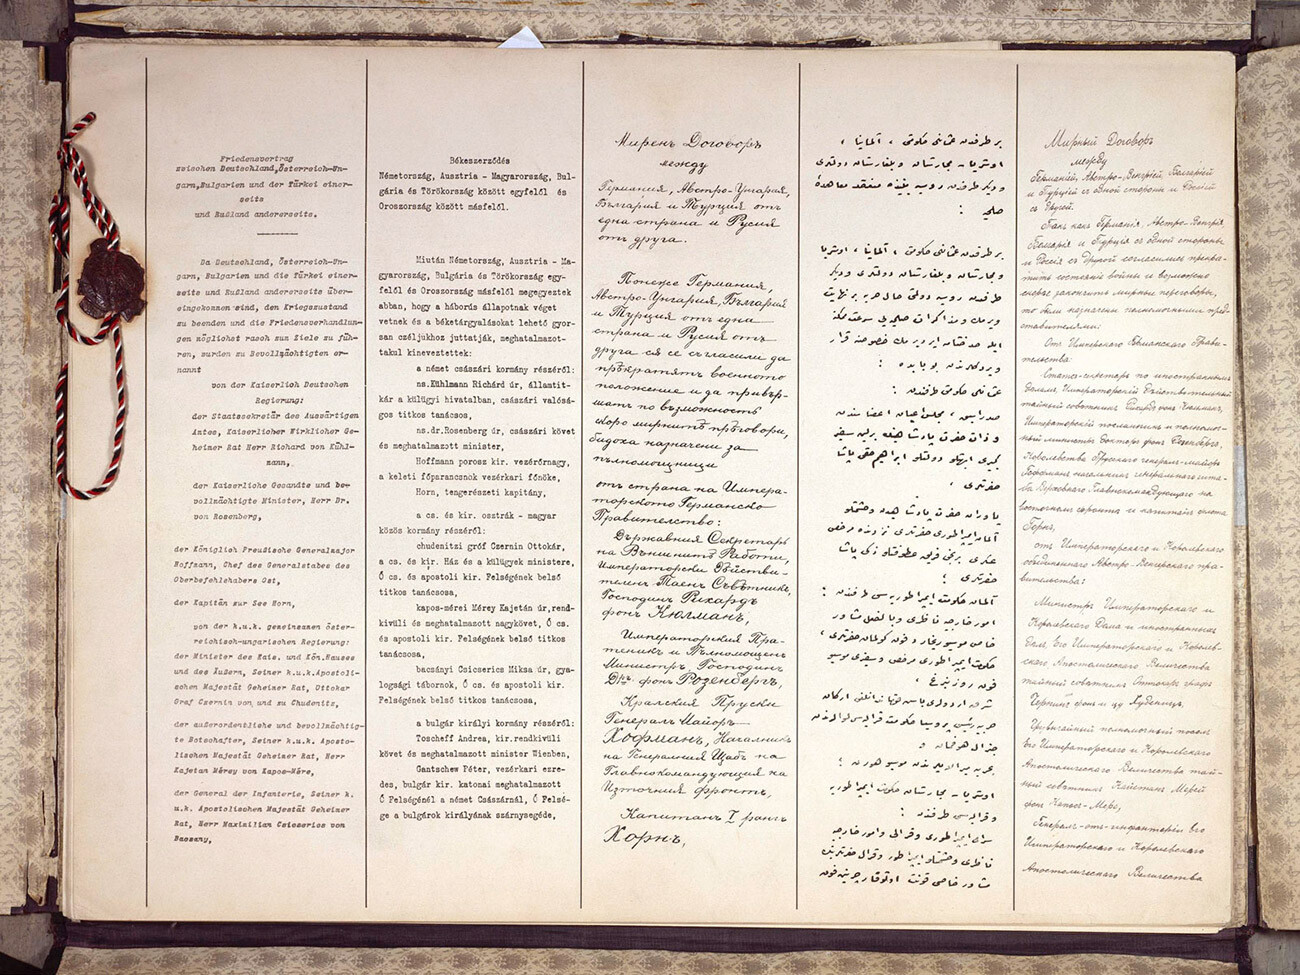 The first page of Brest-Litovsk peace treaty.